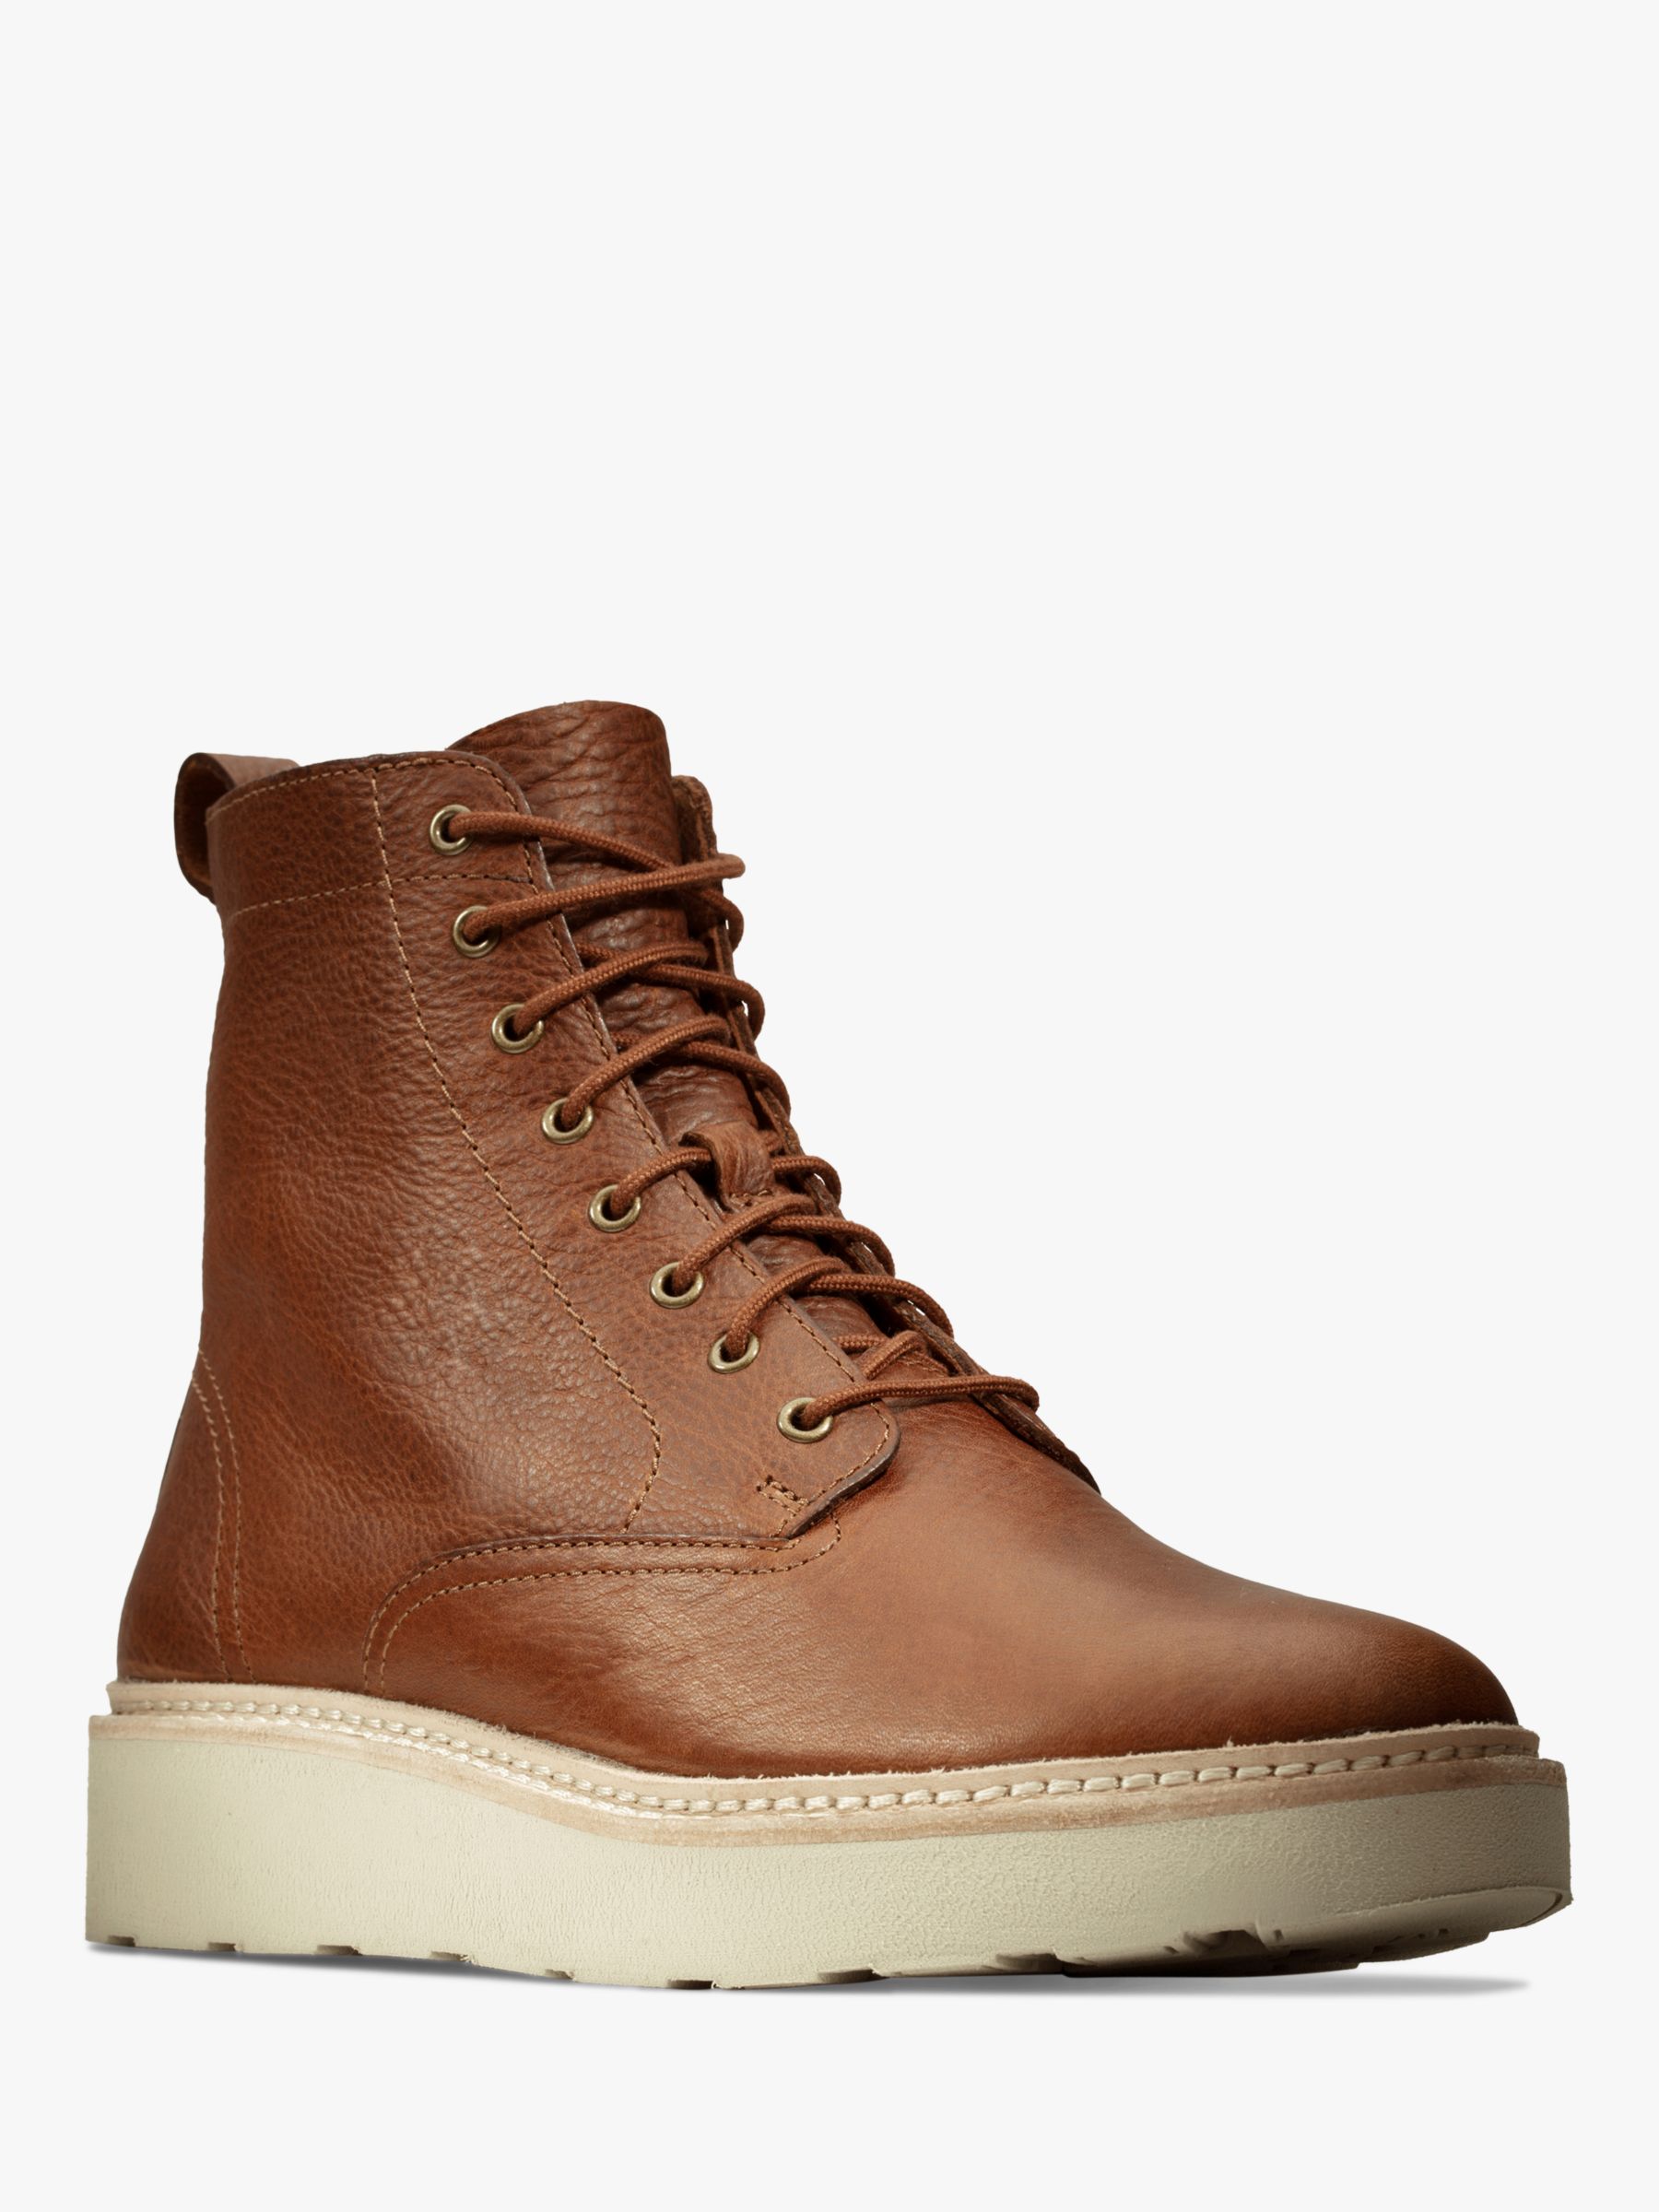 Clarks Trace Pine Leather Lace Up Ankle Boots, Chestnut at John Lewis ...